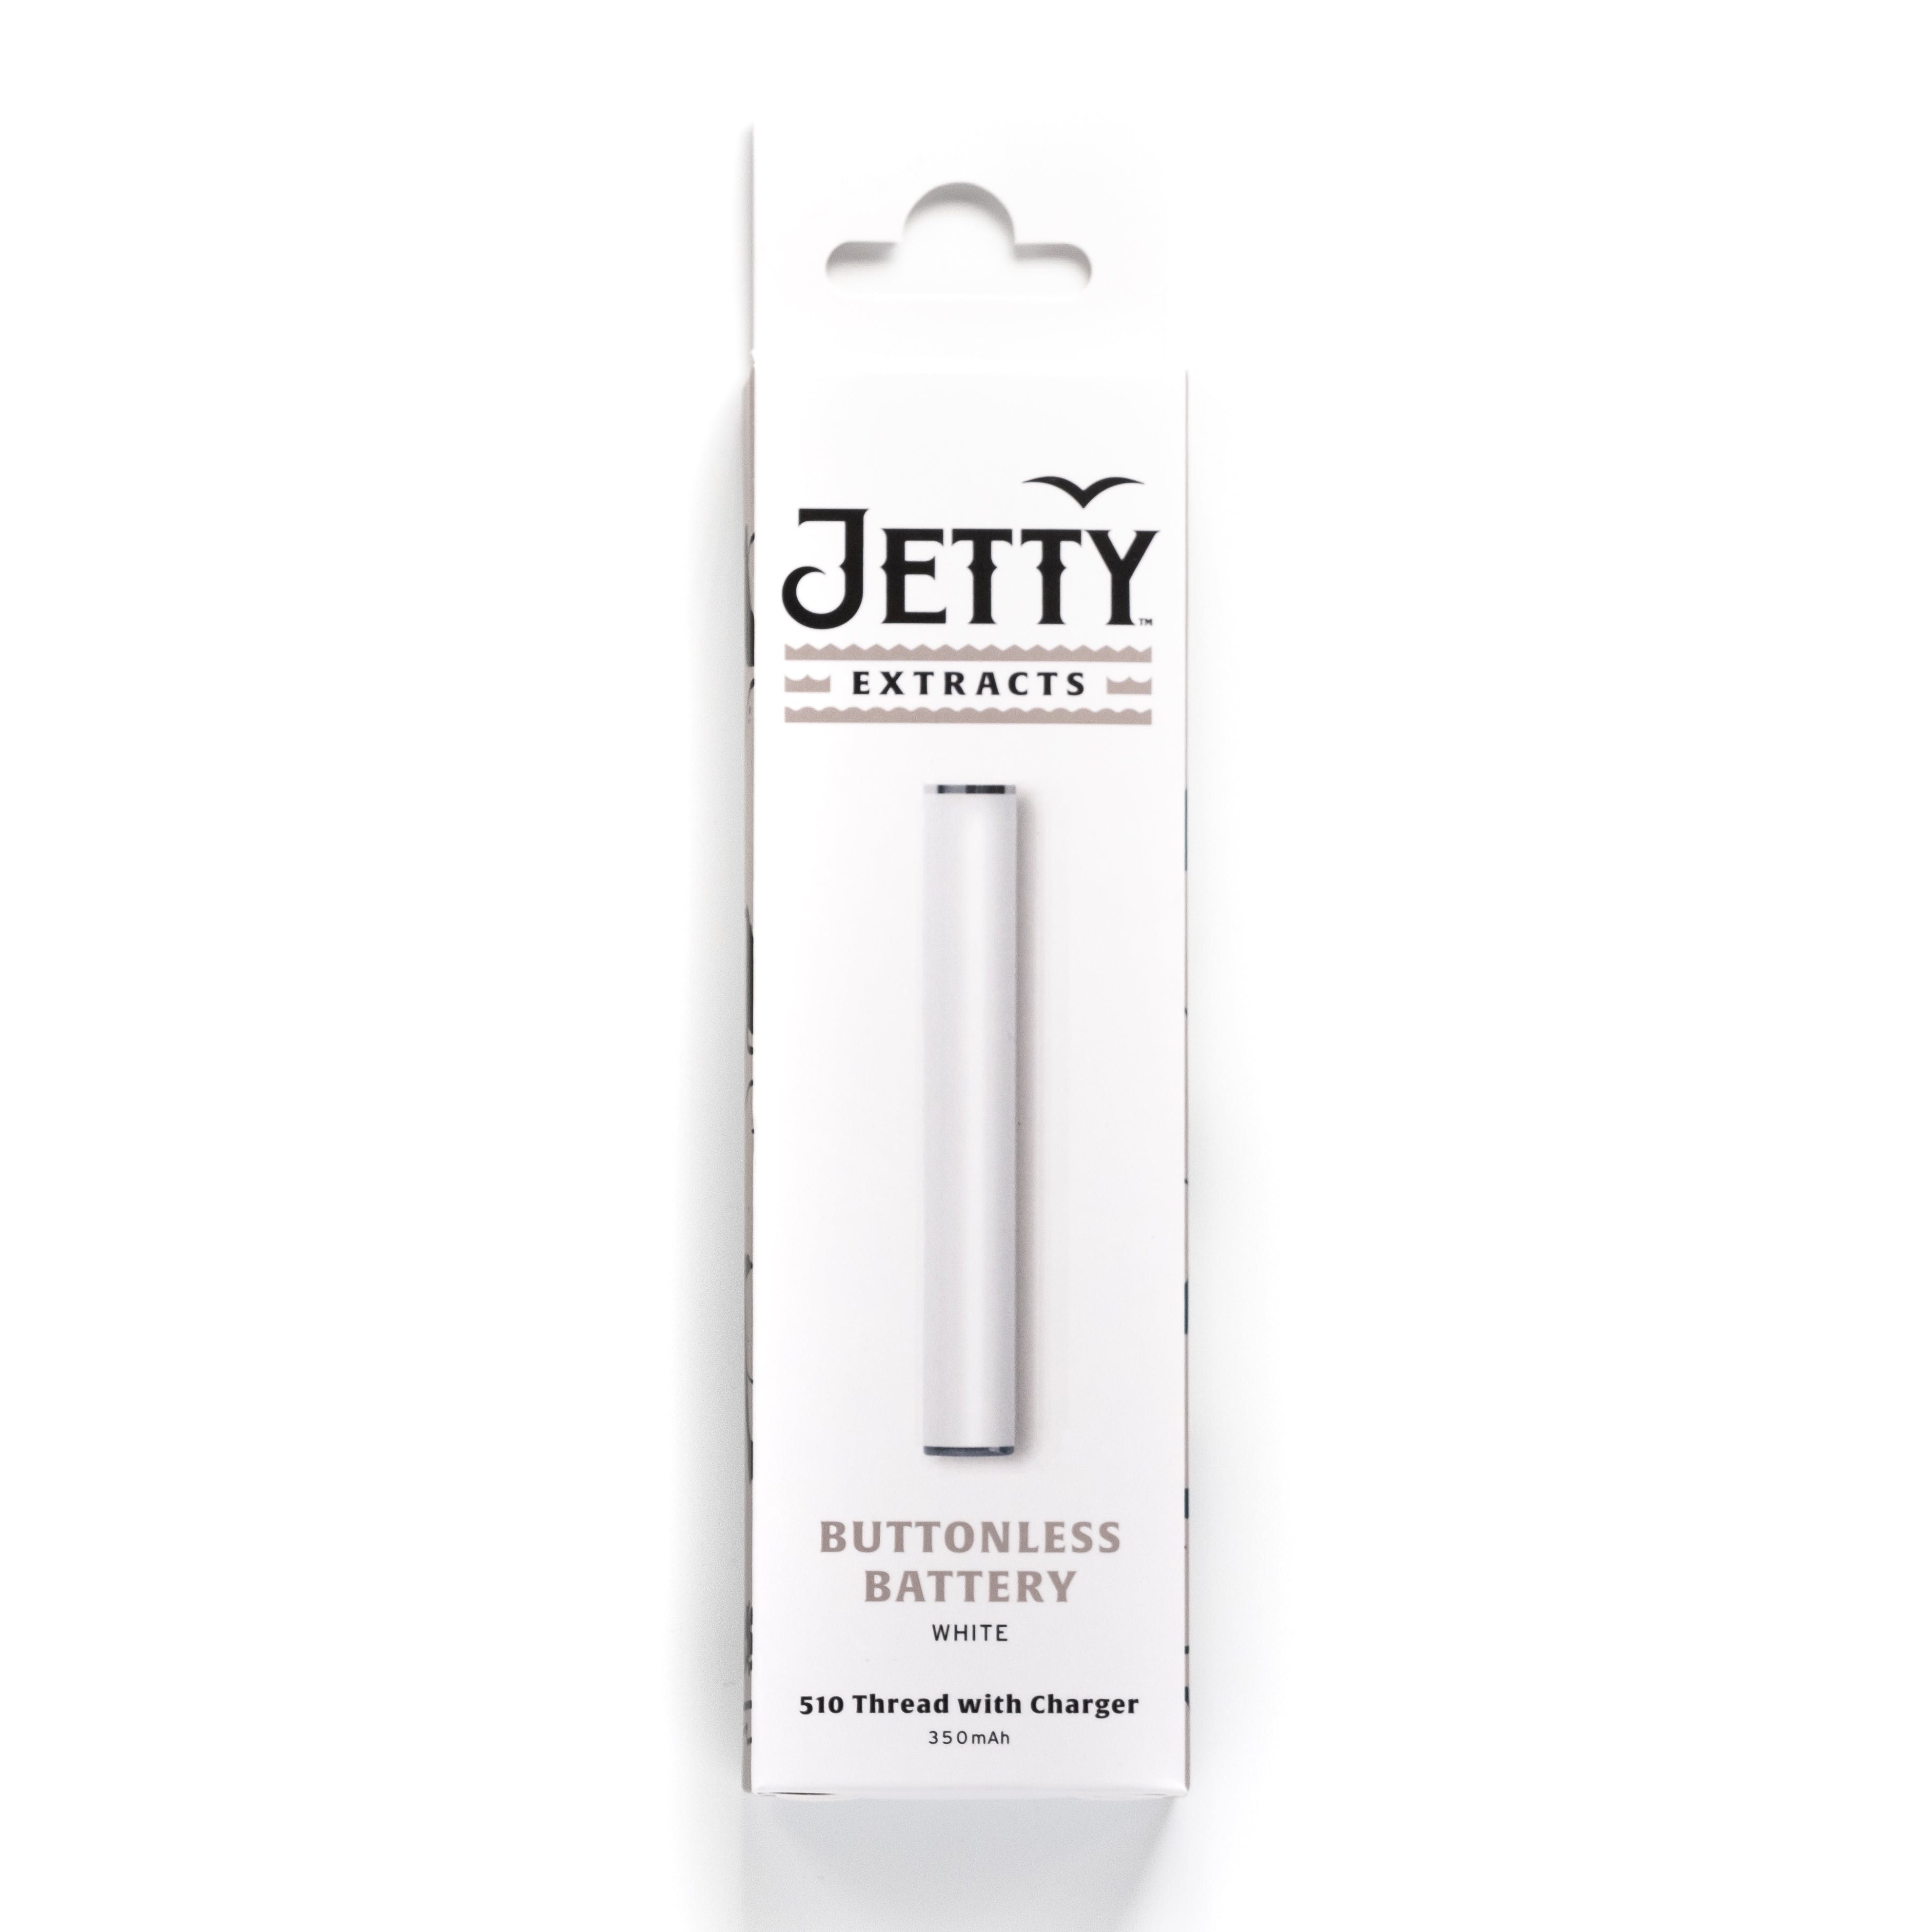 White Vaping Battery - Jetty Extracts